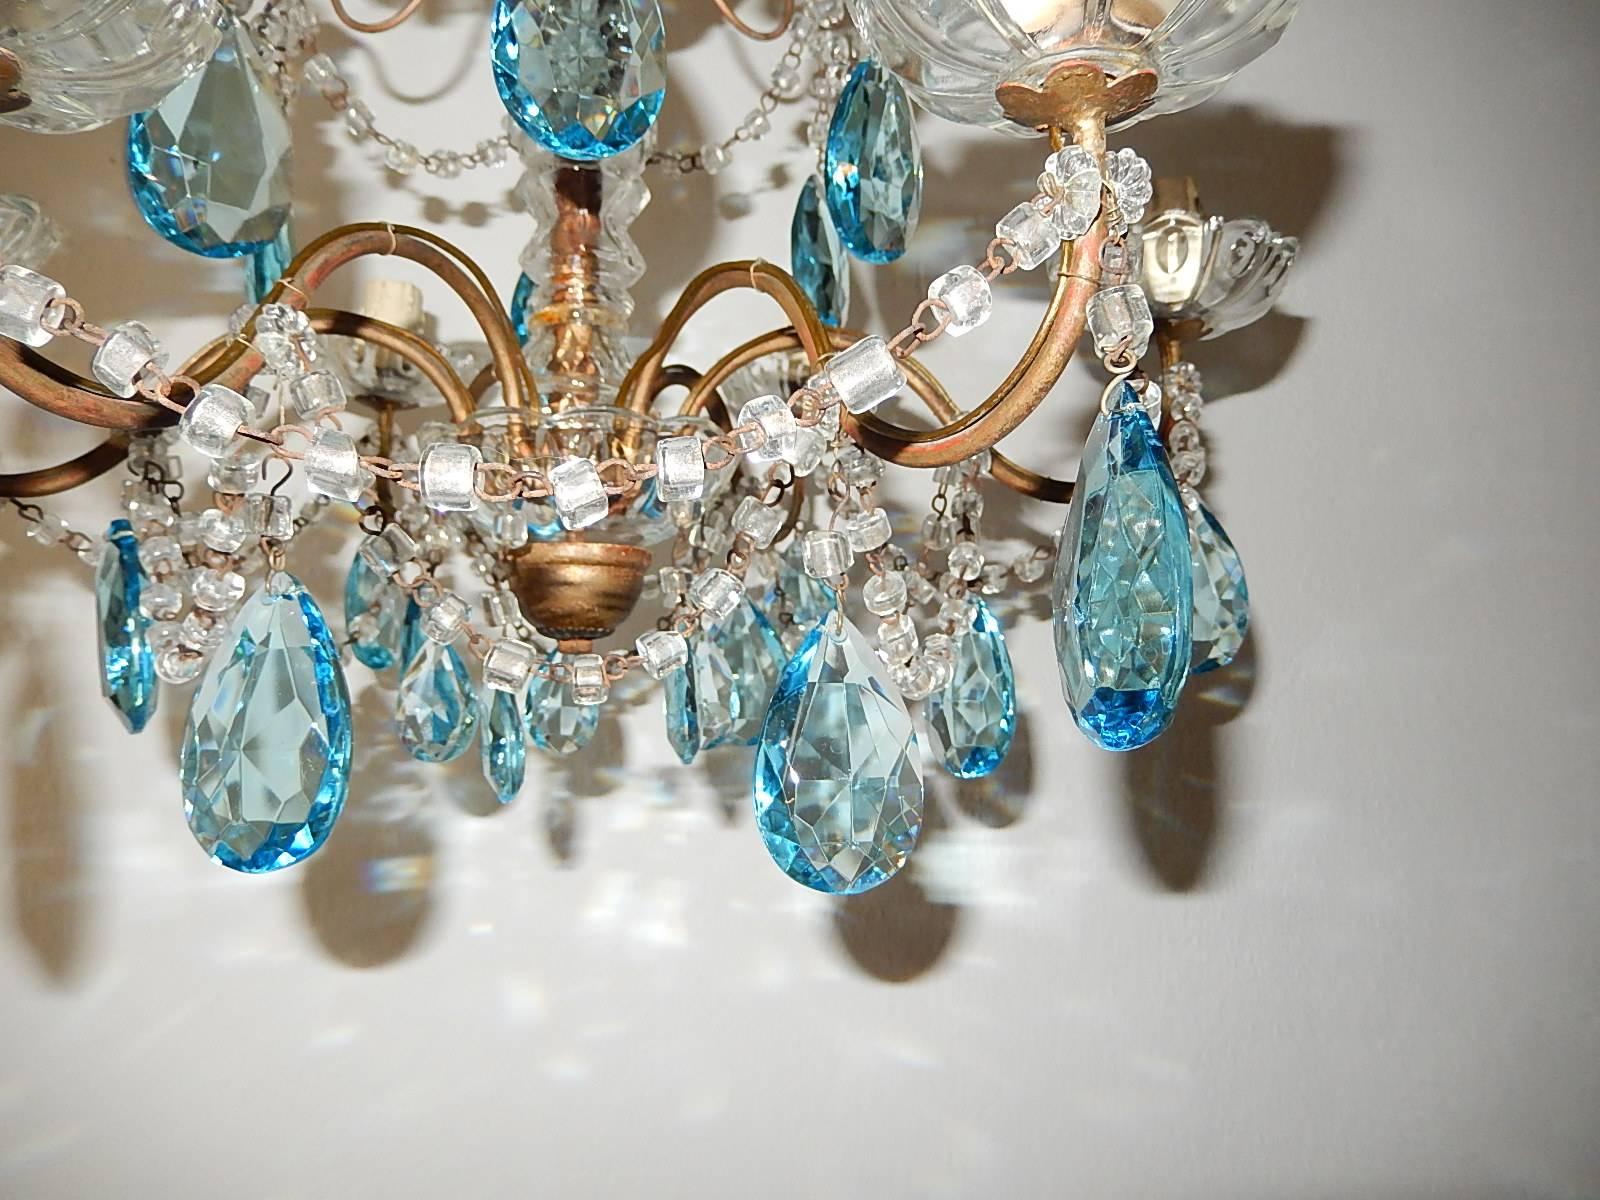 Early 20th Century French Aqua Blue Crystal Prisms Murano Glass Chandelier, circa 1920